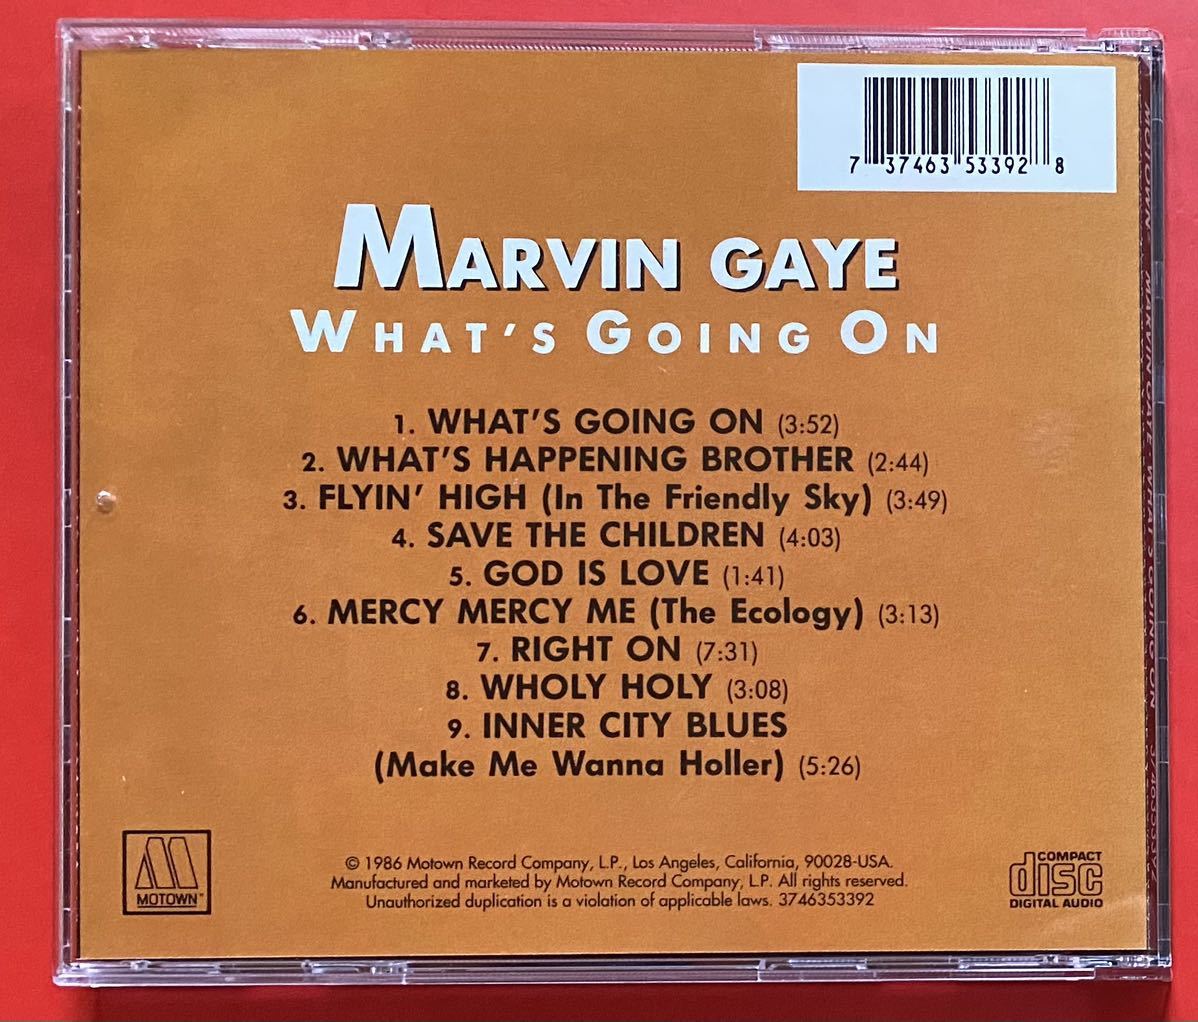 【CD】MARVIN GAYE「WHAT'S GOING ON」マーヴィン・ゲイ 輸入盤 [01220290]_画像2